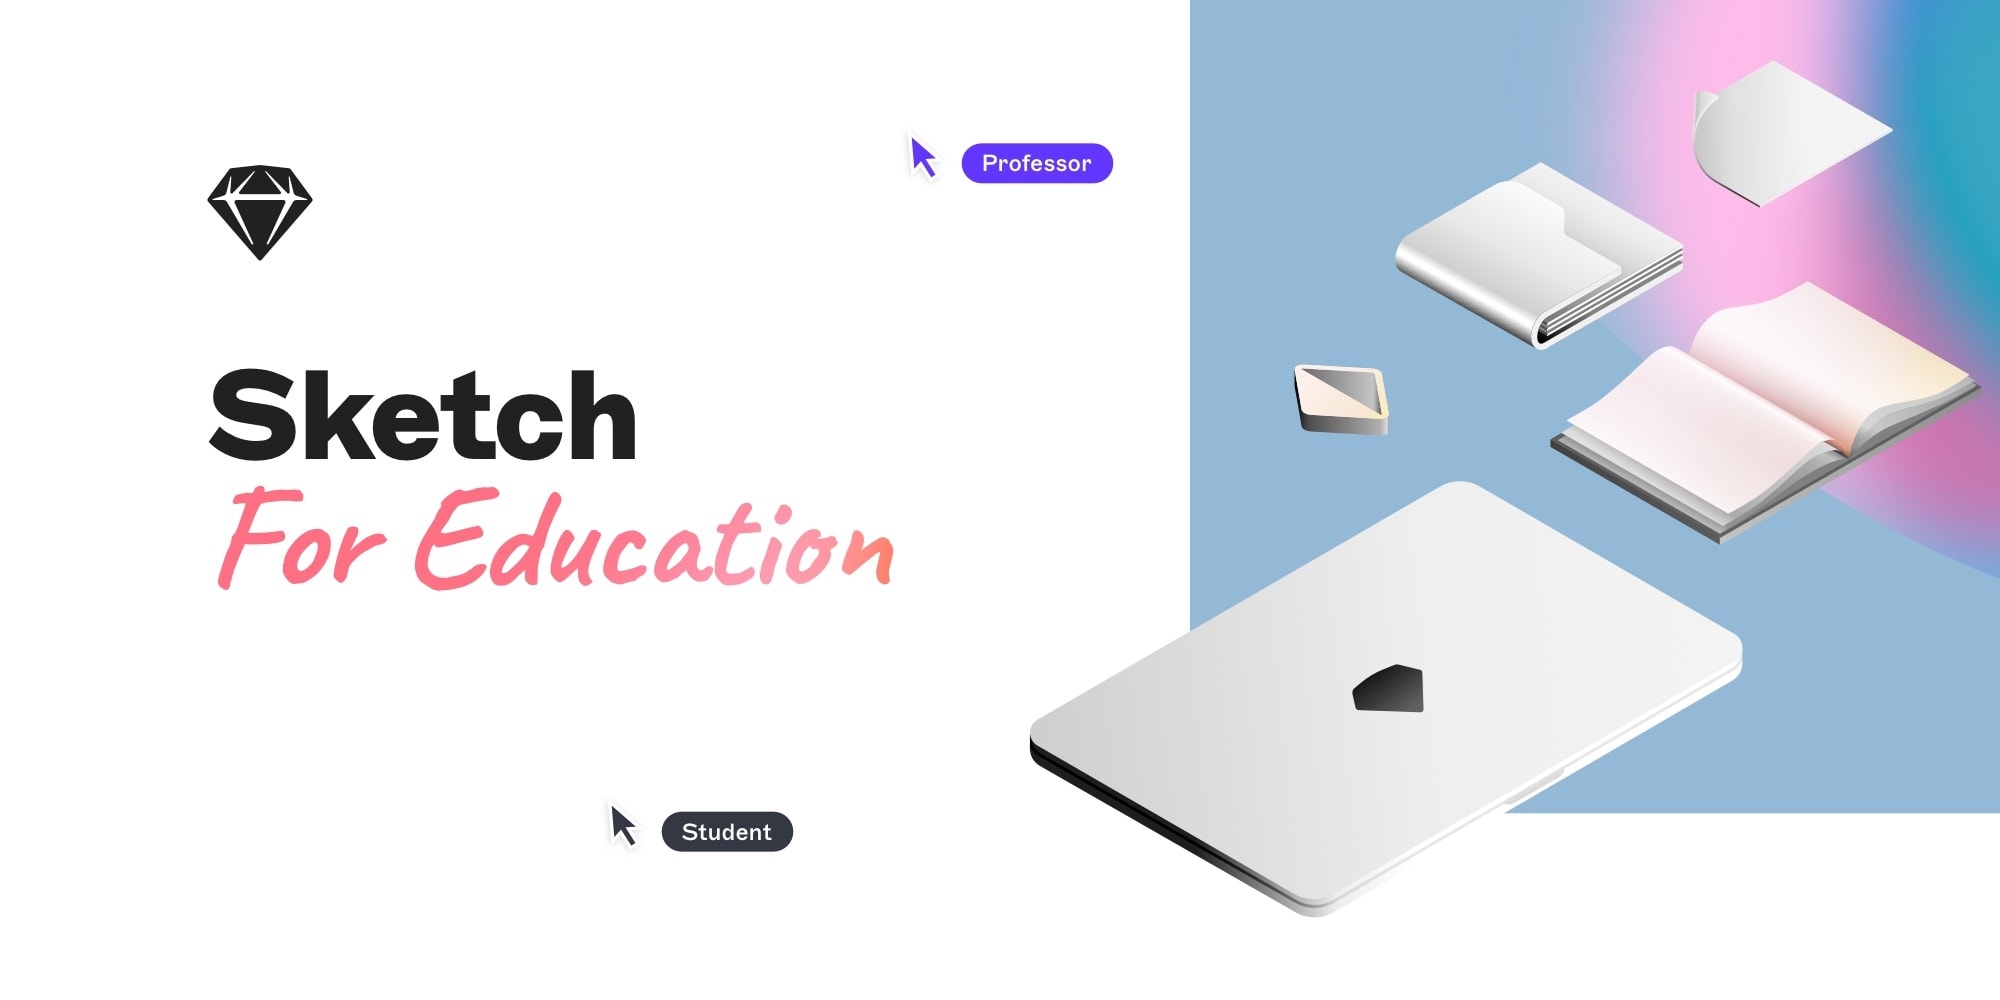 Get Sketch for free as a Student or Educator  Sketch